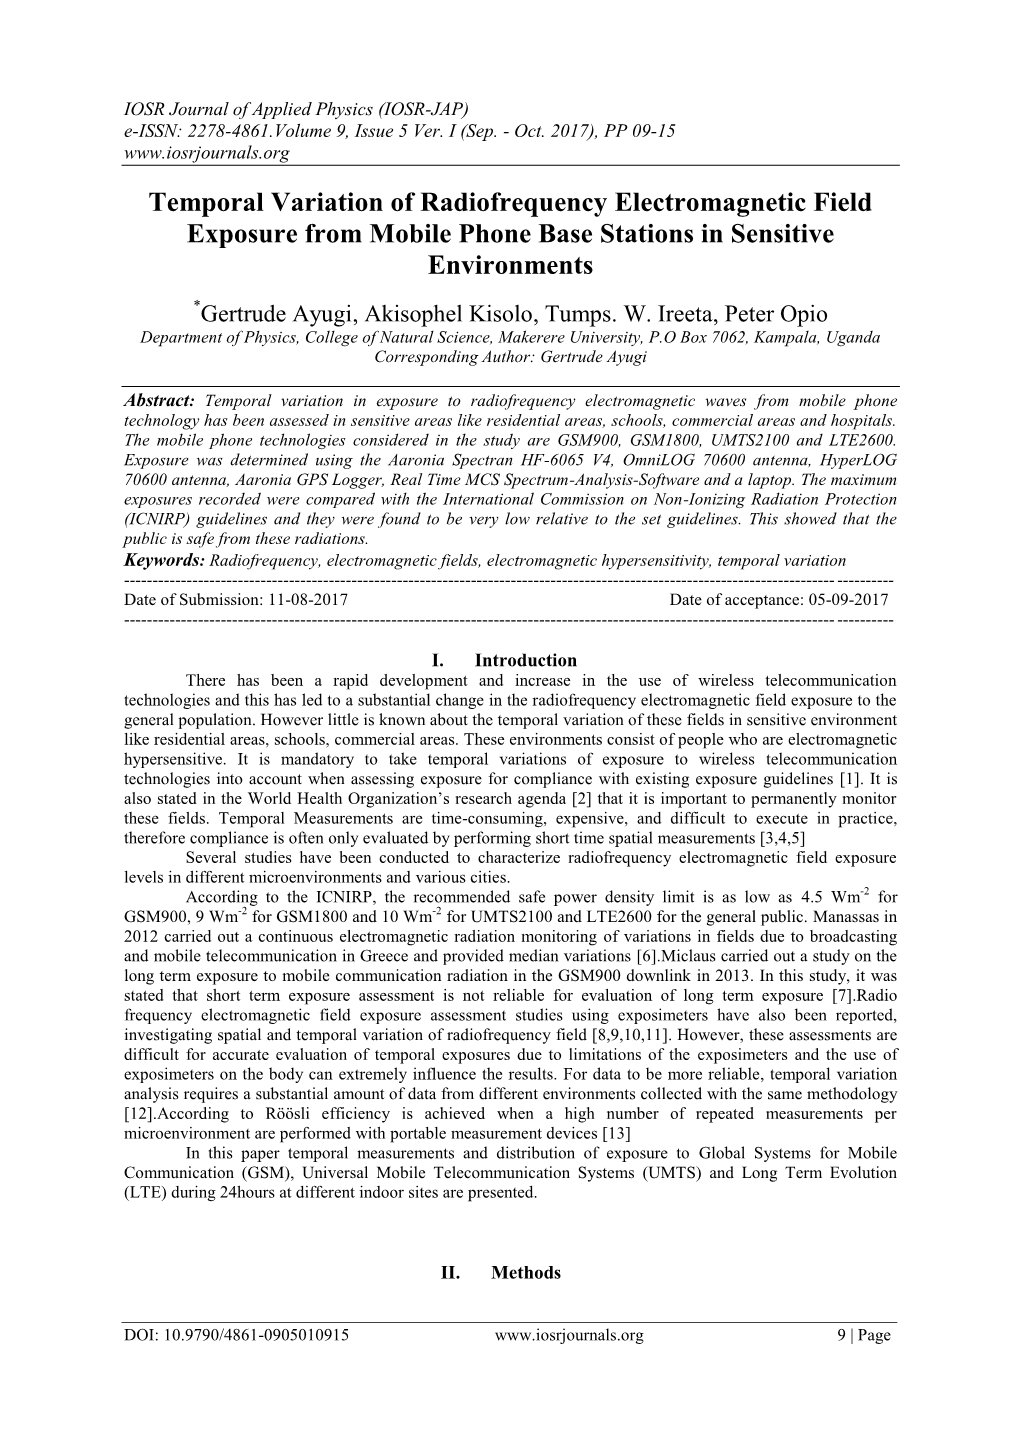 Temporal Variation of Radiofrequency Electromagnetic Field Exposure from Mobile Phone Base Stations in Sensitive Environments